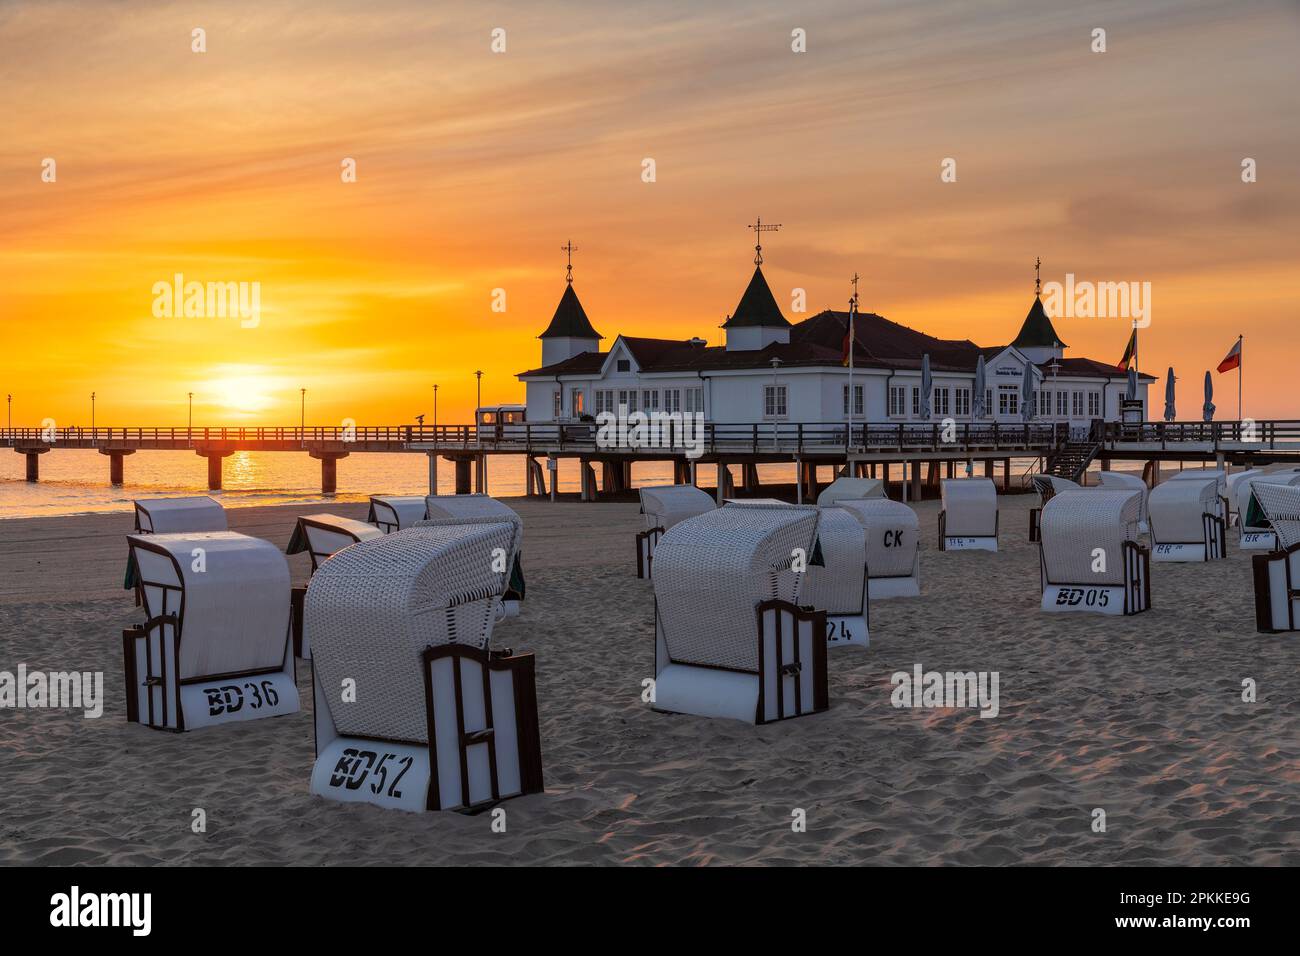 Pier and beach chairs on the beach of Ahlbeck, Usedom Island, Baltic Sea, Mecklenburg-Western Pomerania, Germany, Europe Stock Photo